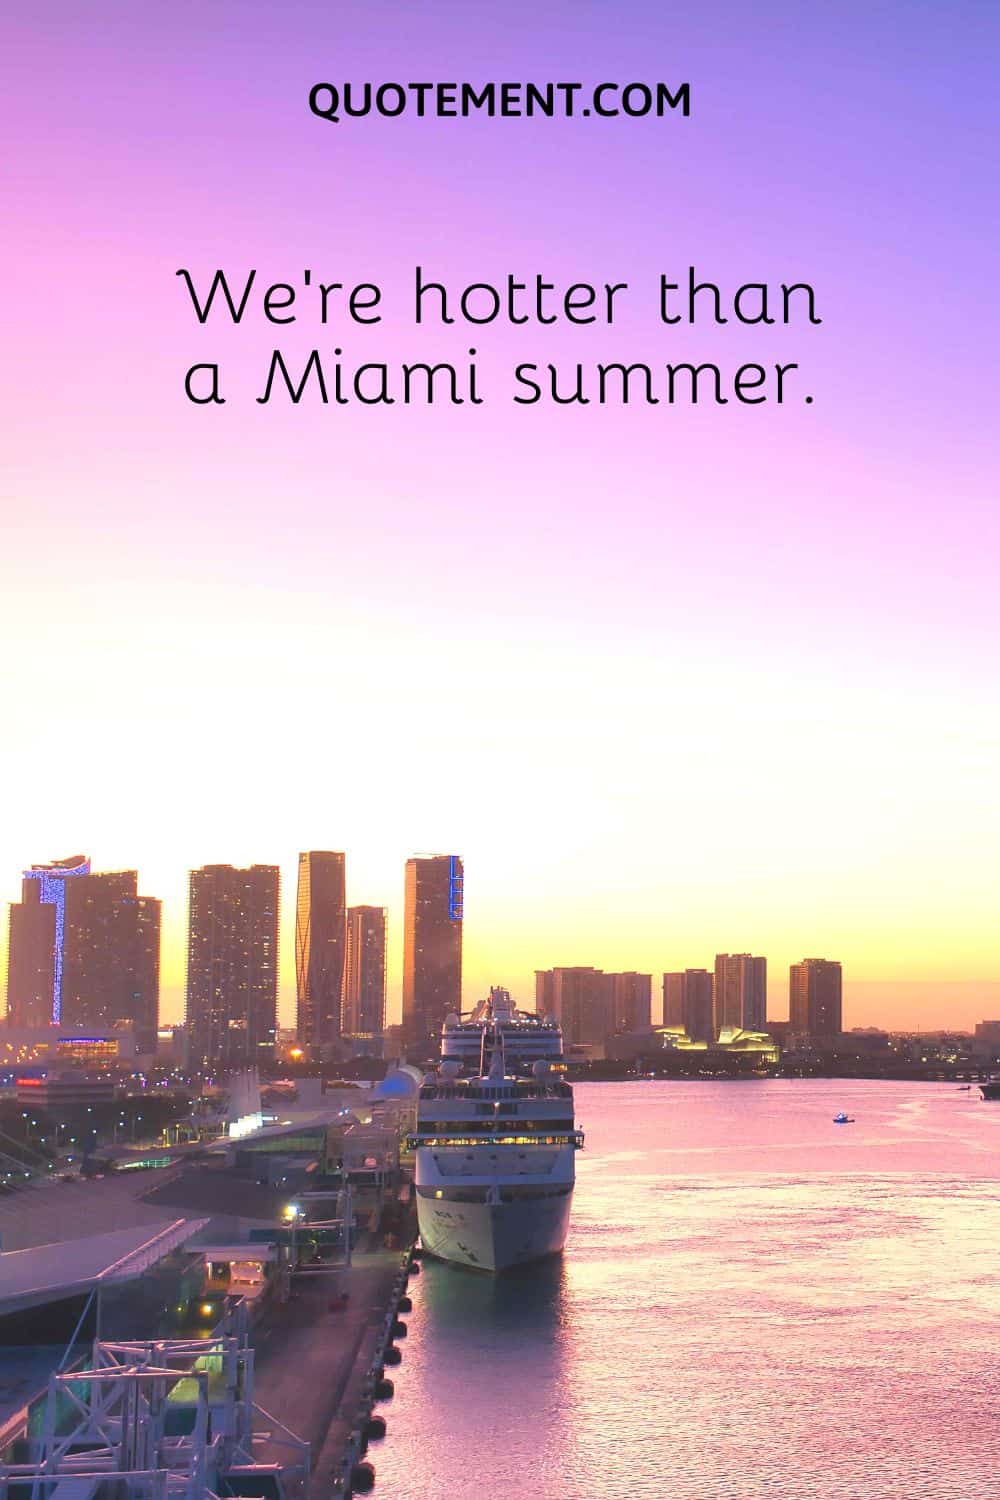 We’re hotter than a Miami summer